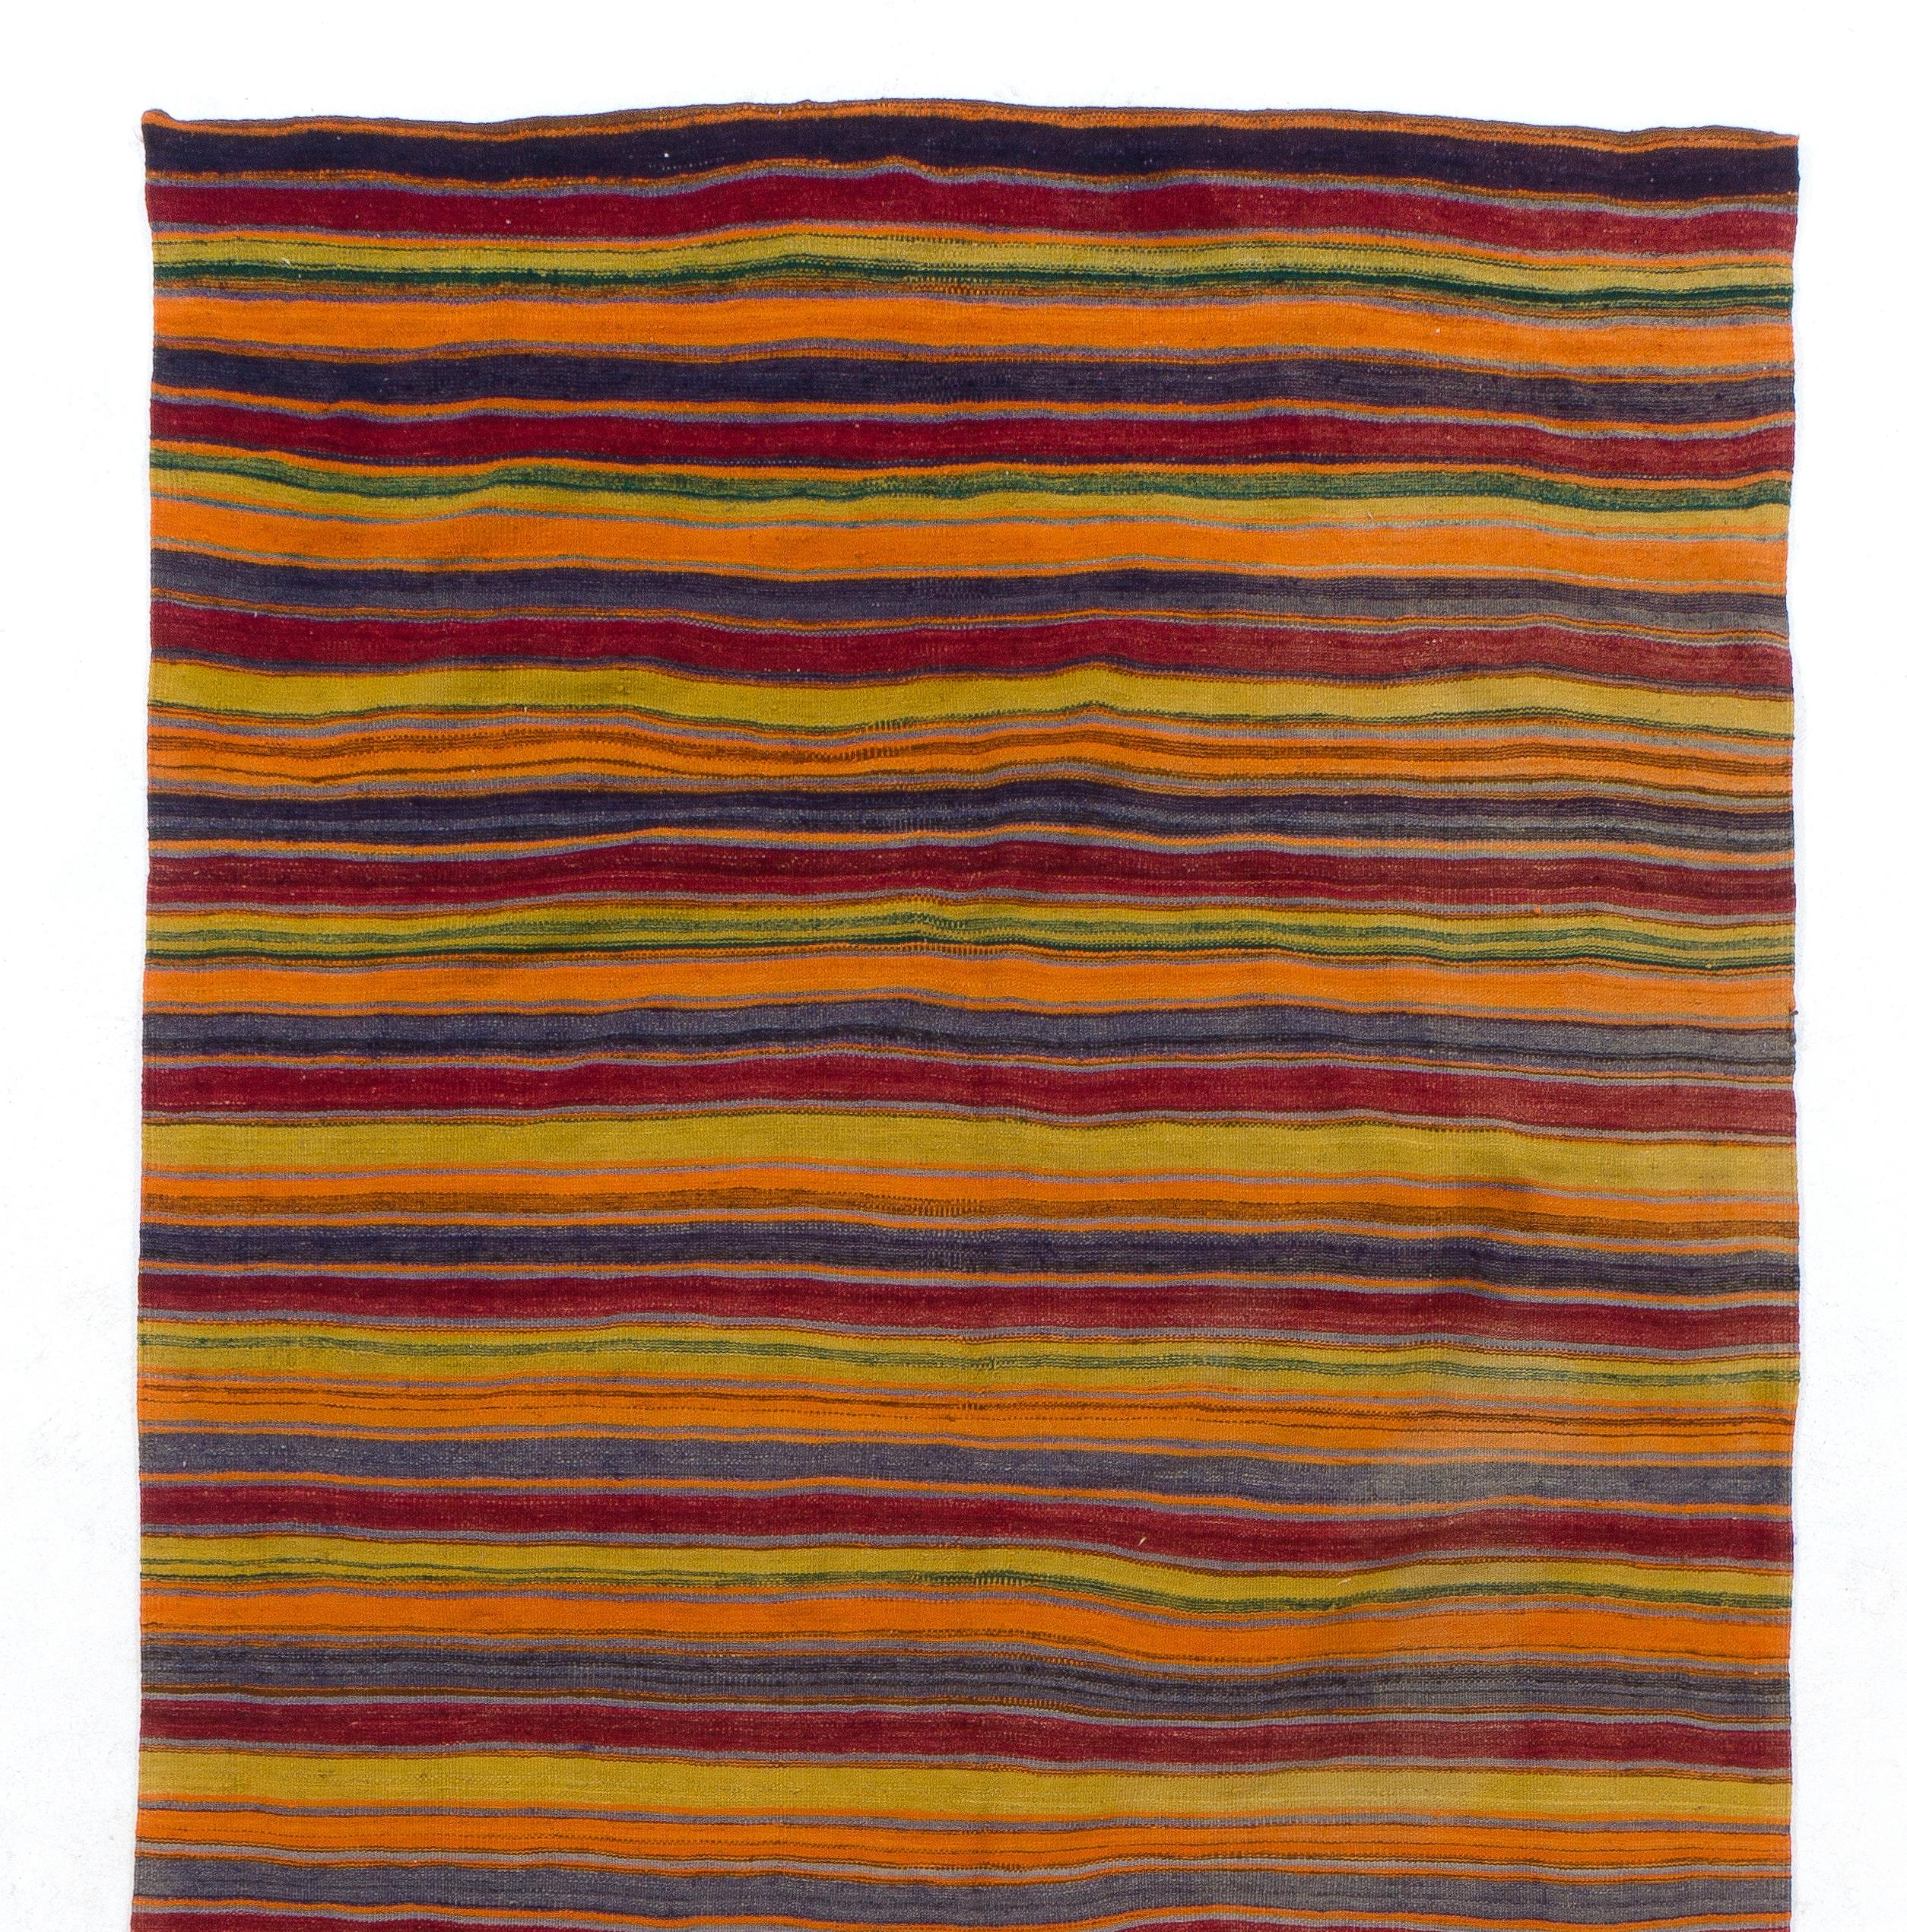 Vintage handwoven flat-weave (Kilim) with striped design, 100% wool. Measures: 5.8 x 12.7 ft.
We can modify the dimensions if requested, i.e. make it shorter and/or narrower.
Reversible; both sides can be used.
Ideal for both residential and